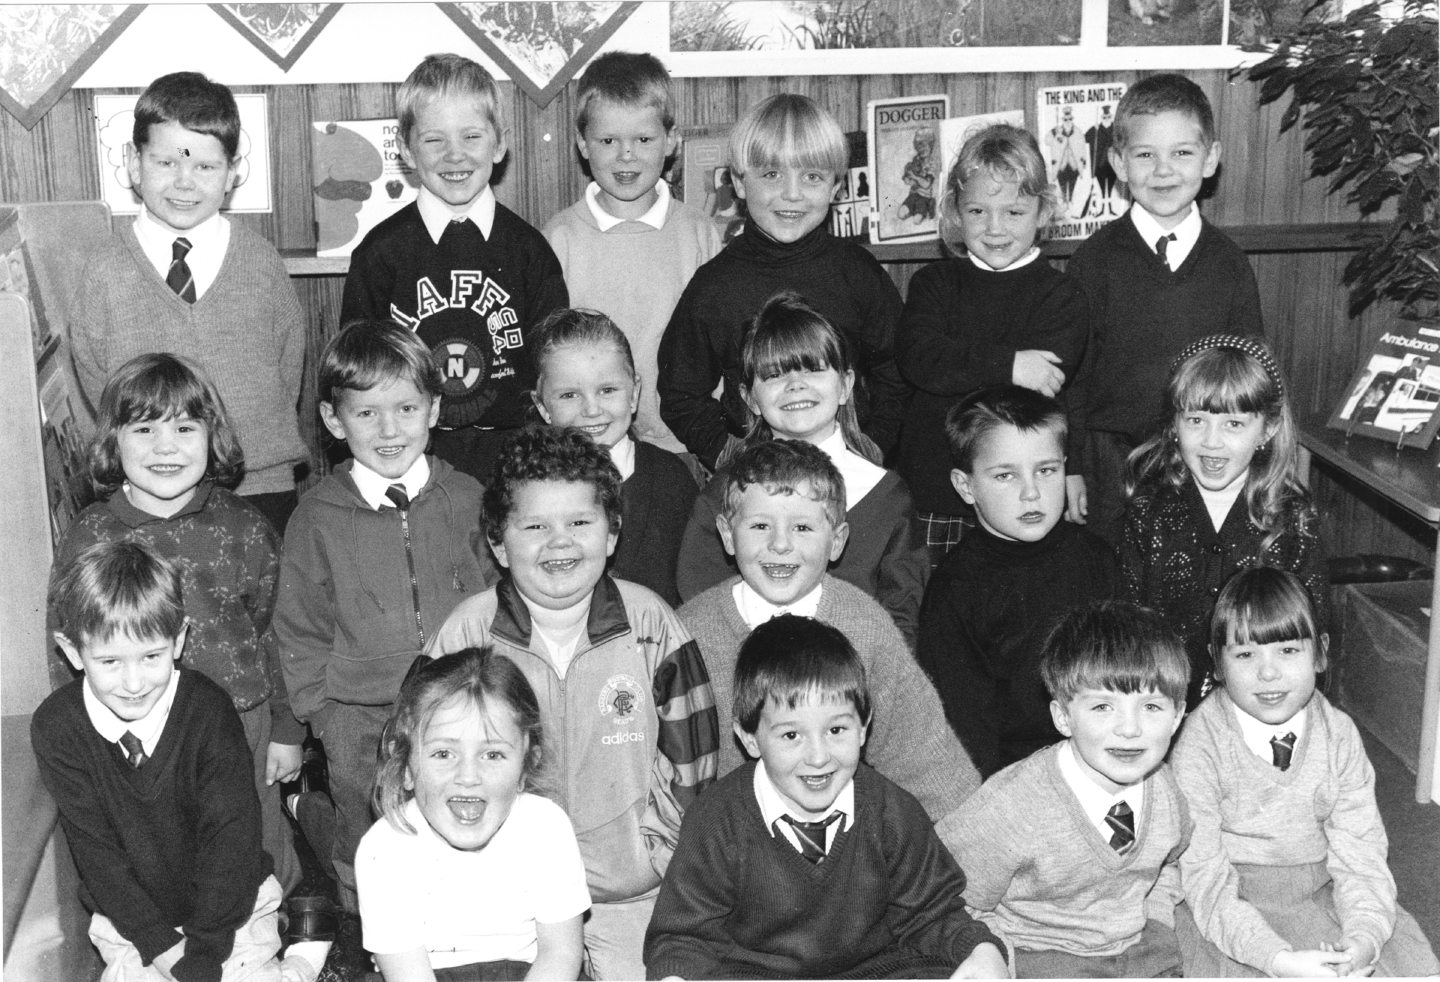 Primary one pupils, room three, in their reading corner in 1992.